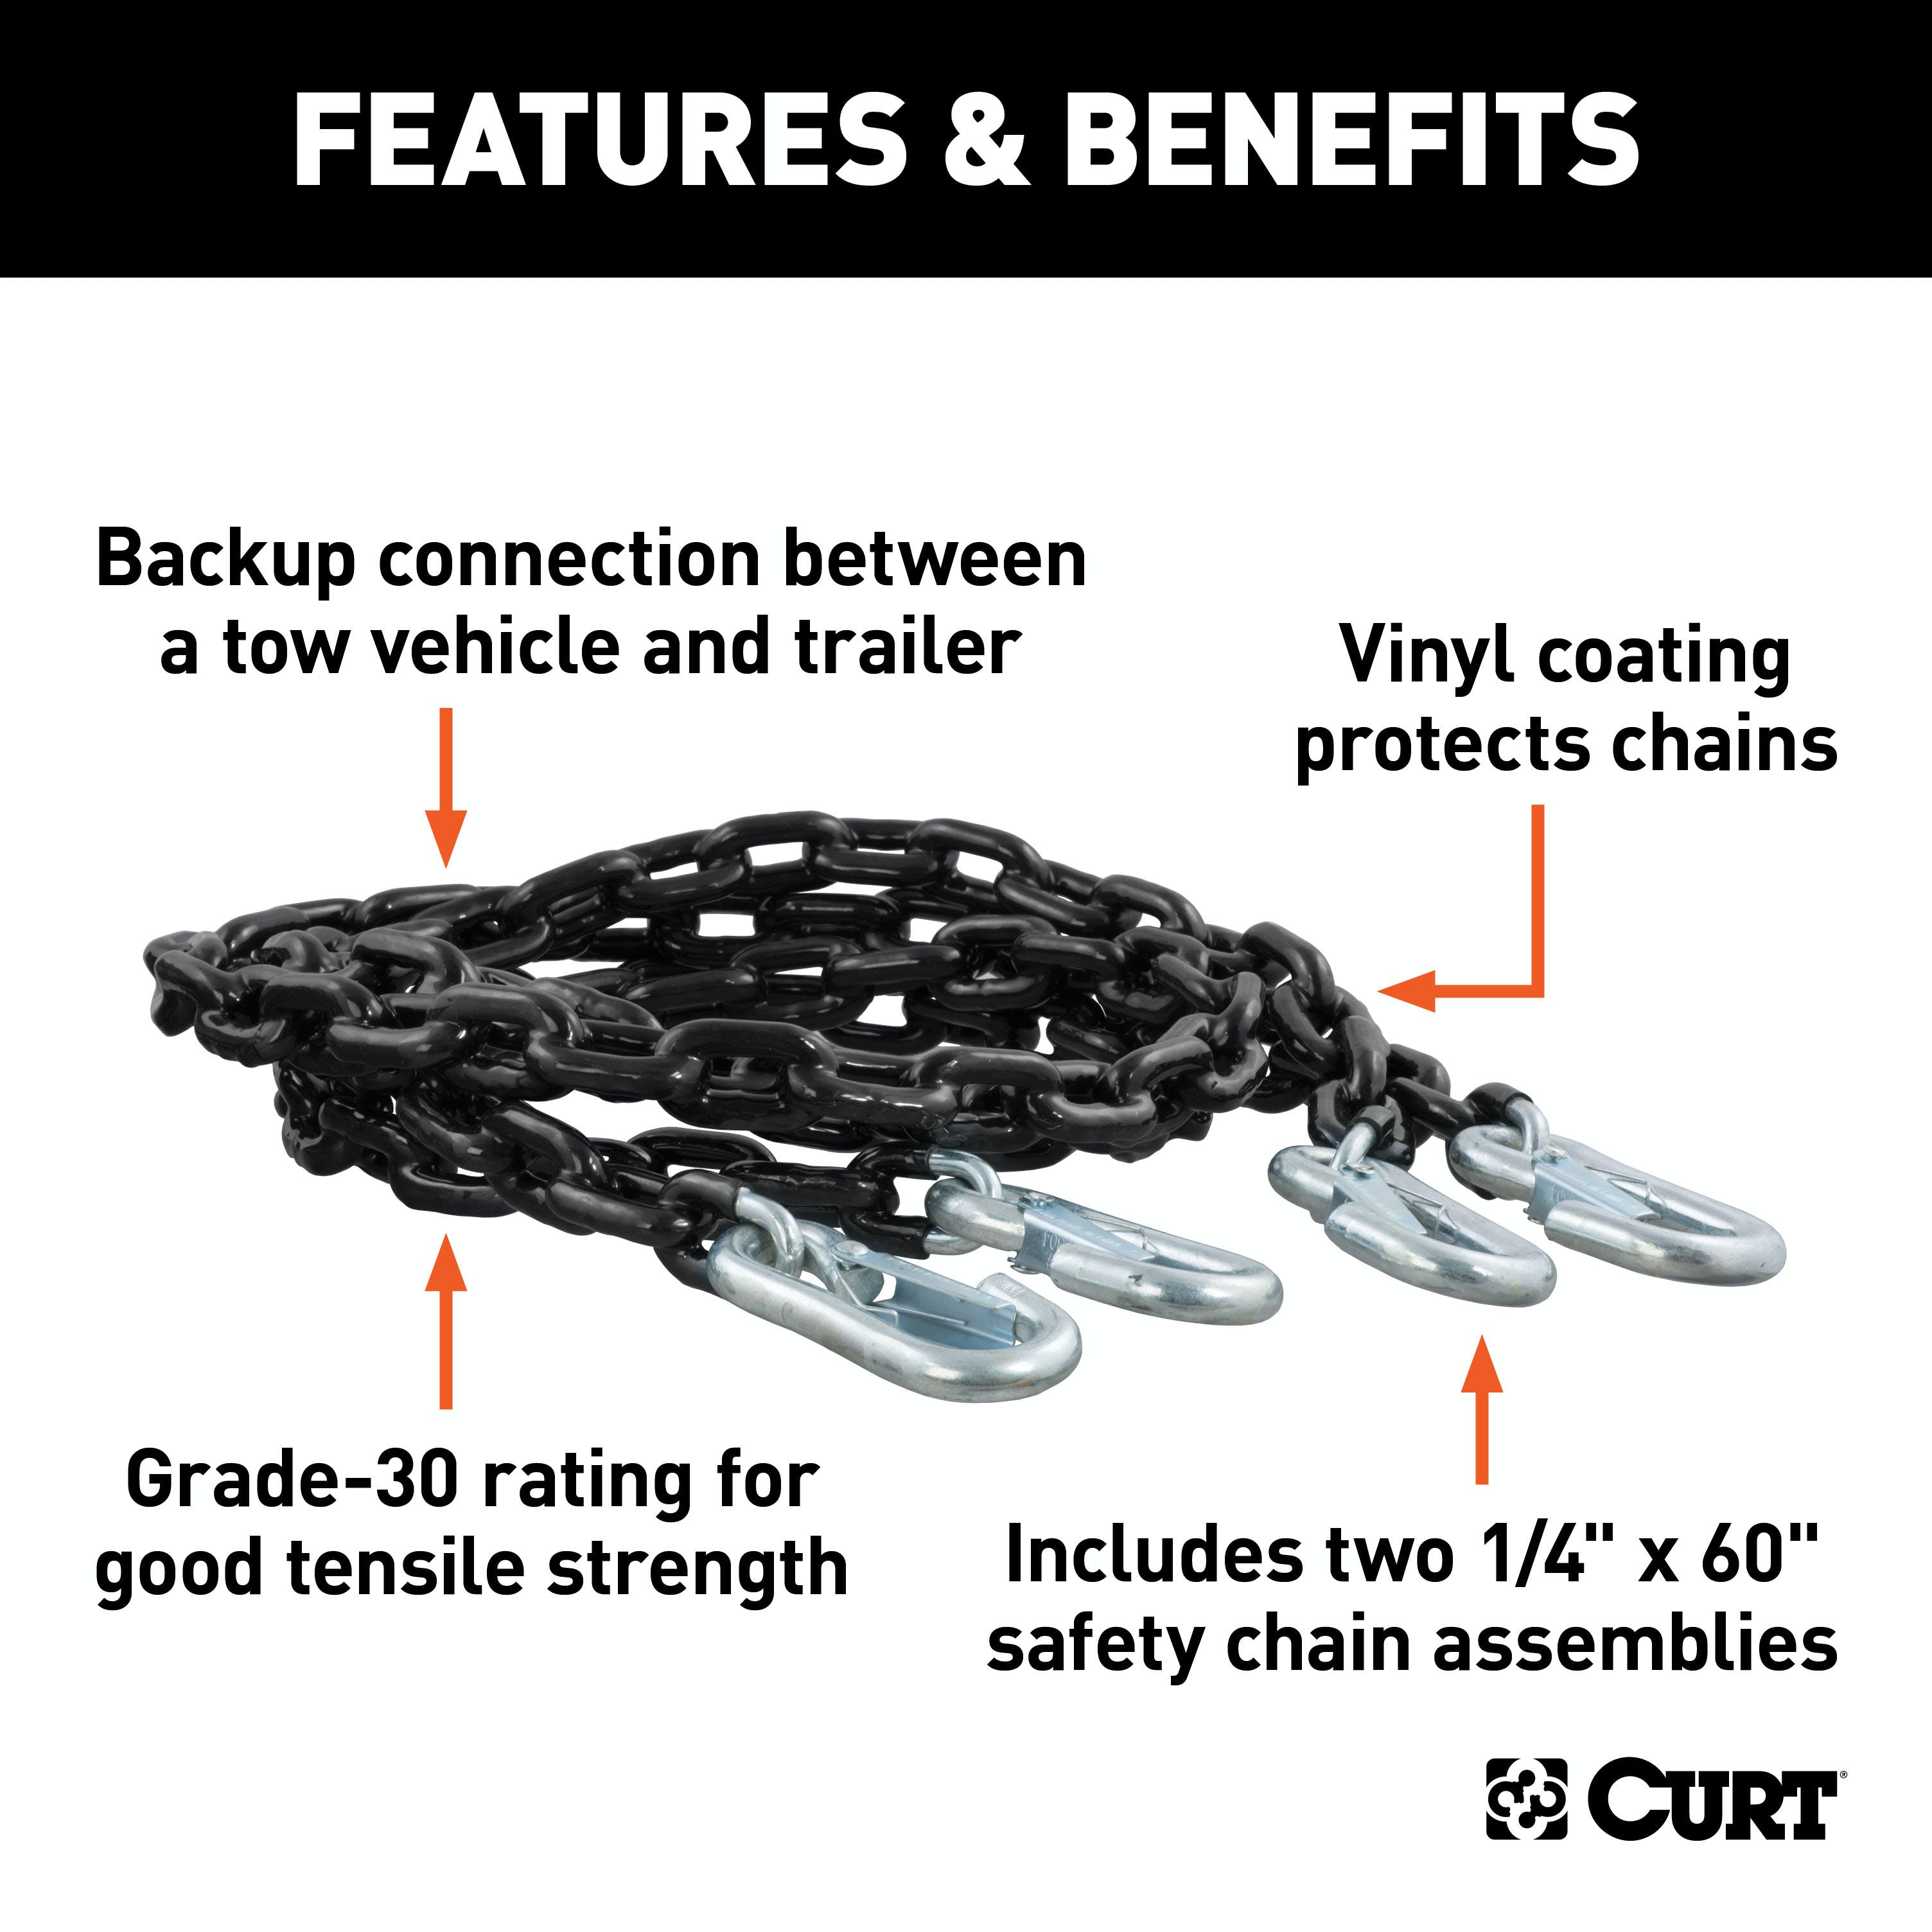 Curt | 65 Safety Chains With 2 Snap Hooks Each (5,000 Lbs, Vinyl-coated, 2-pack)